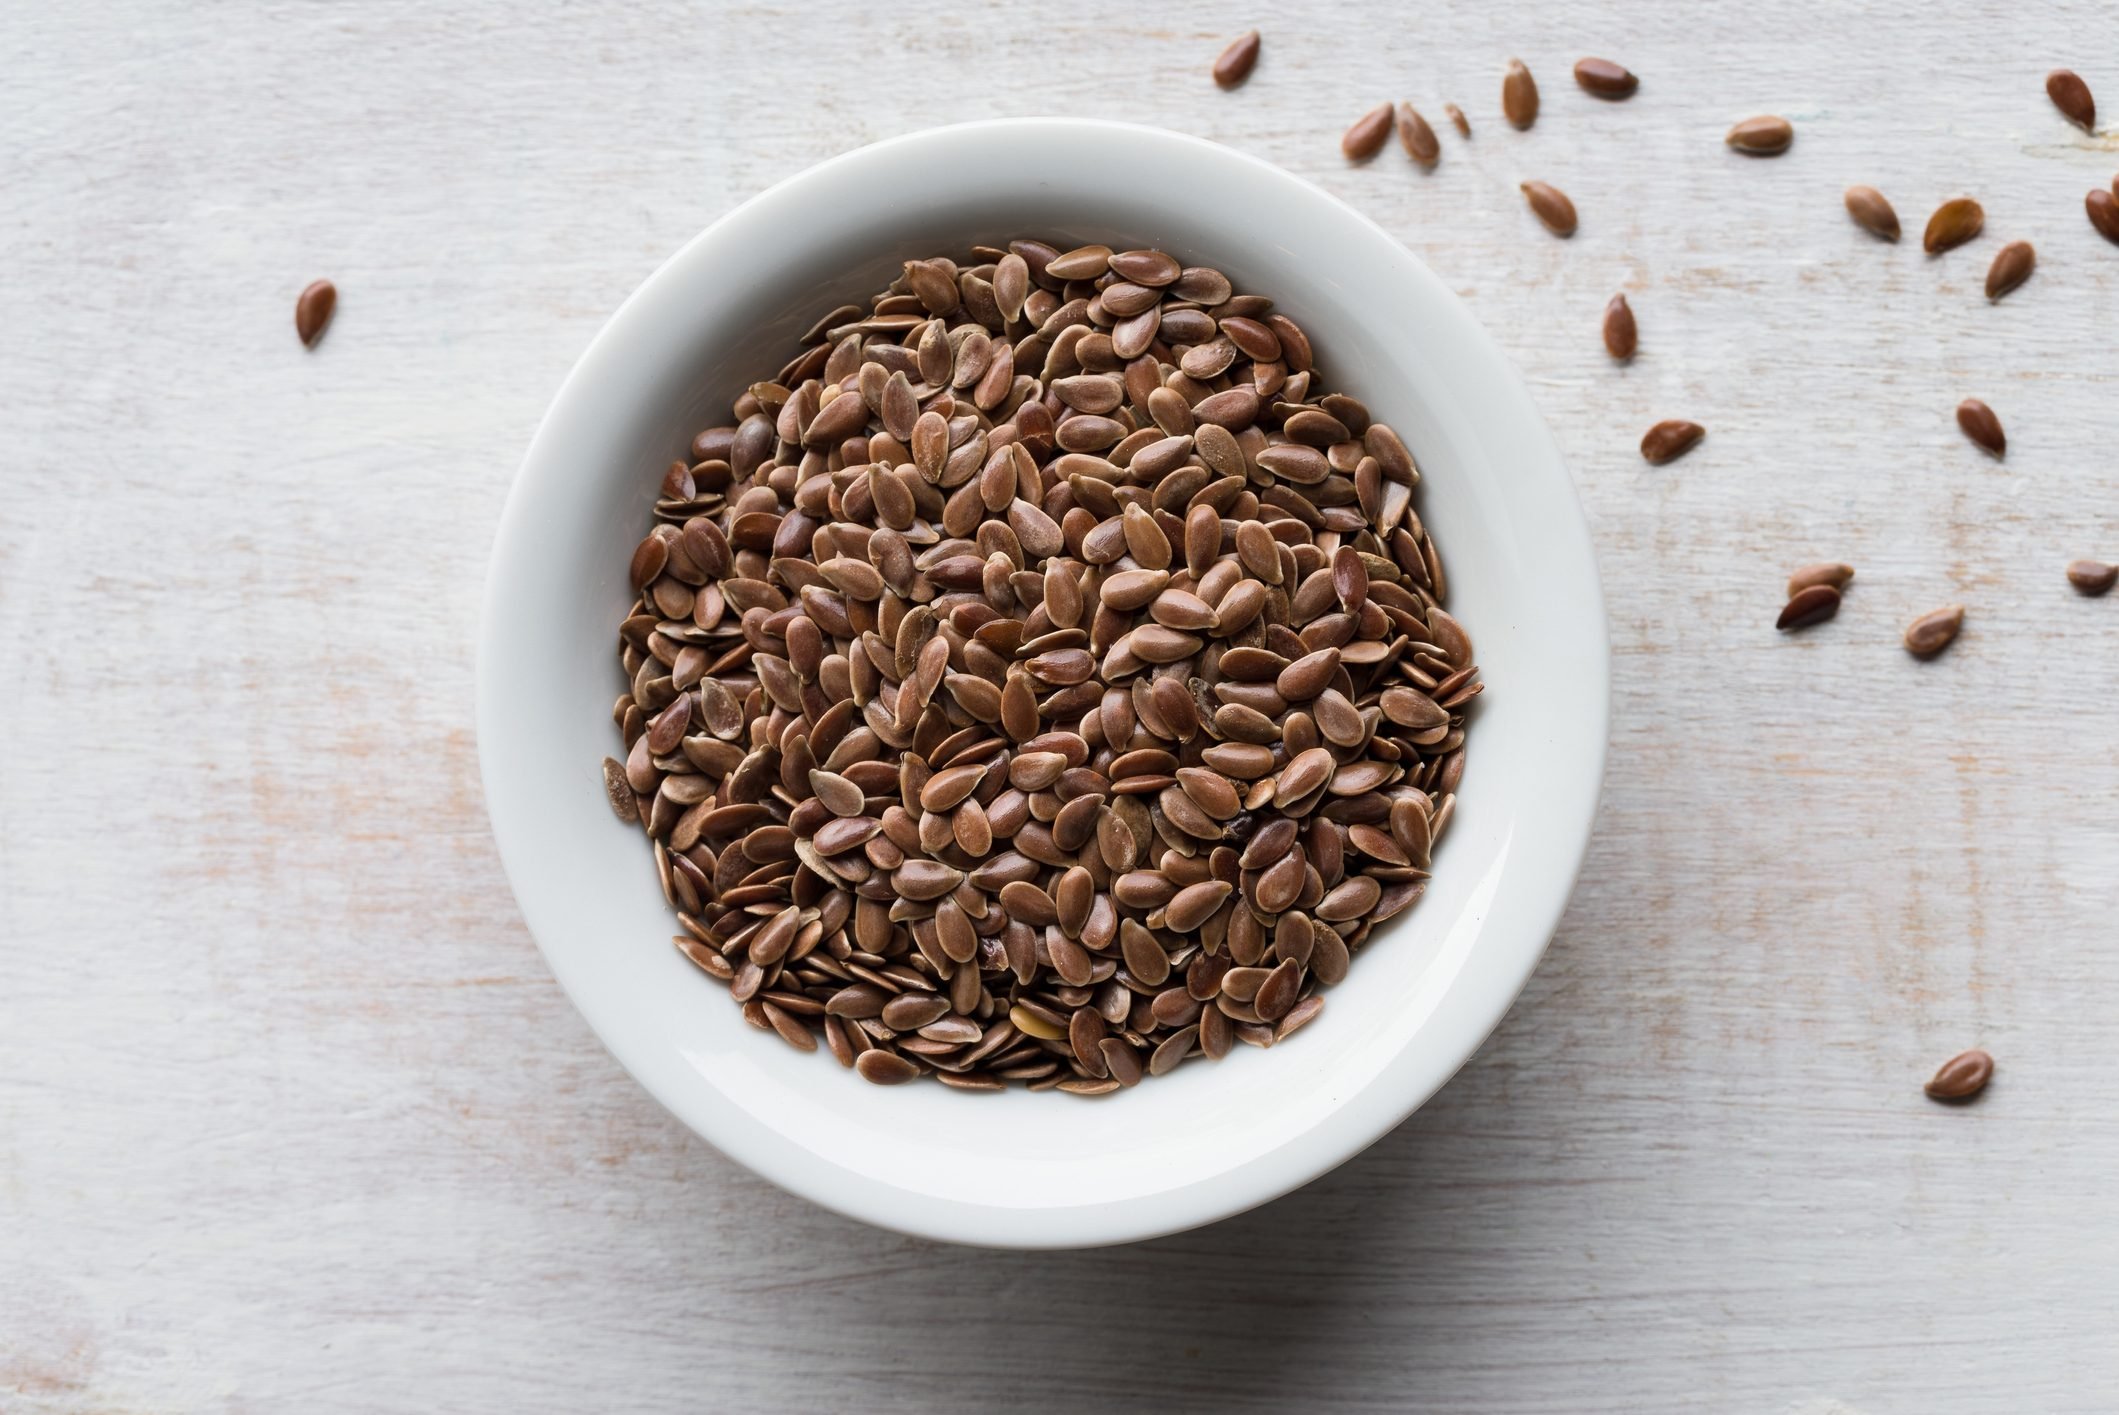 Flaxseed Nutrition Facts and Health Benefits